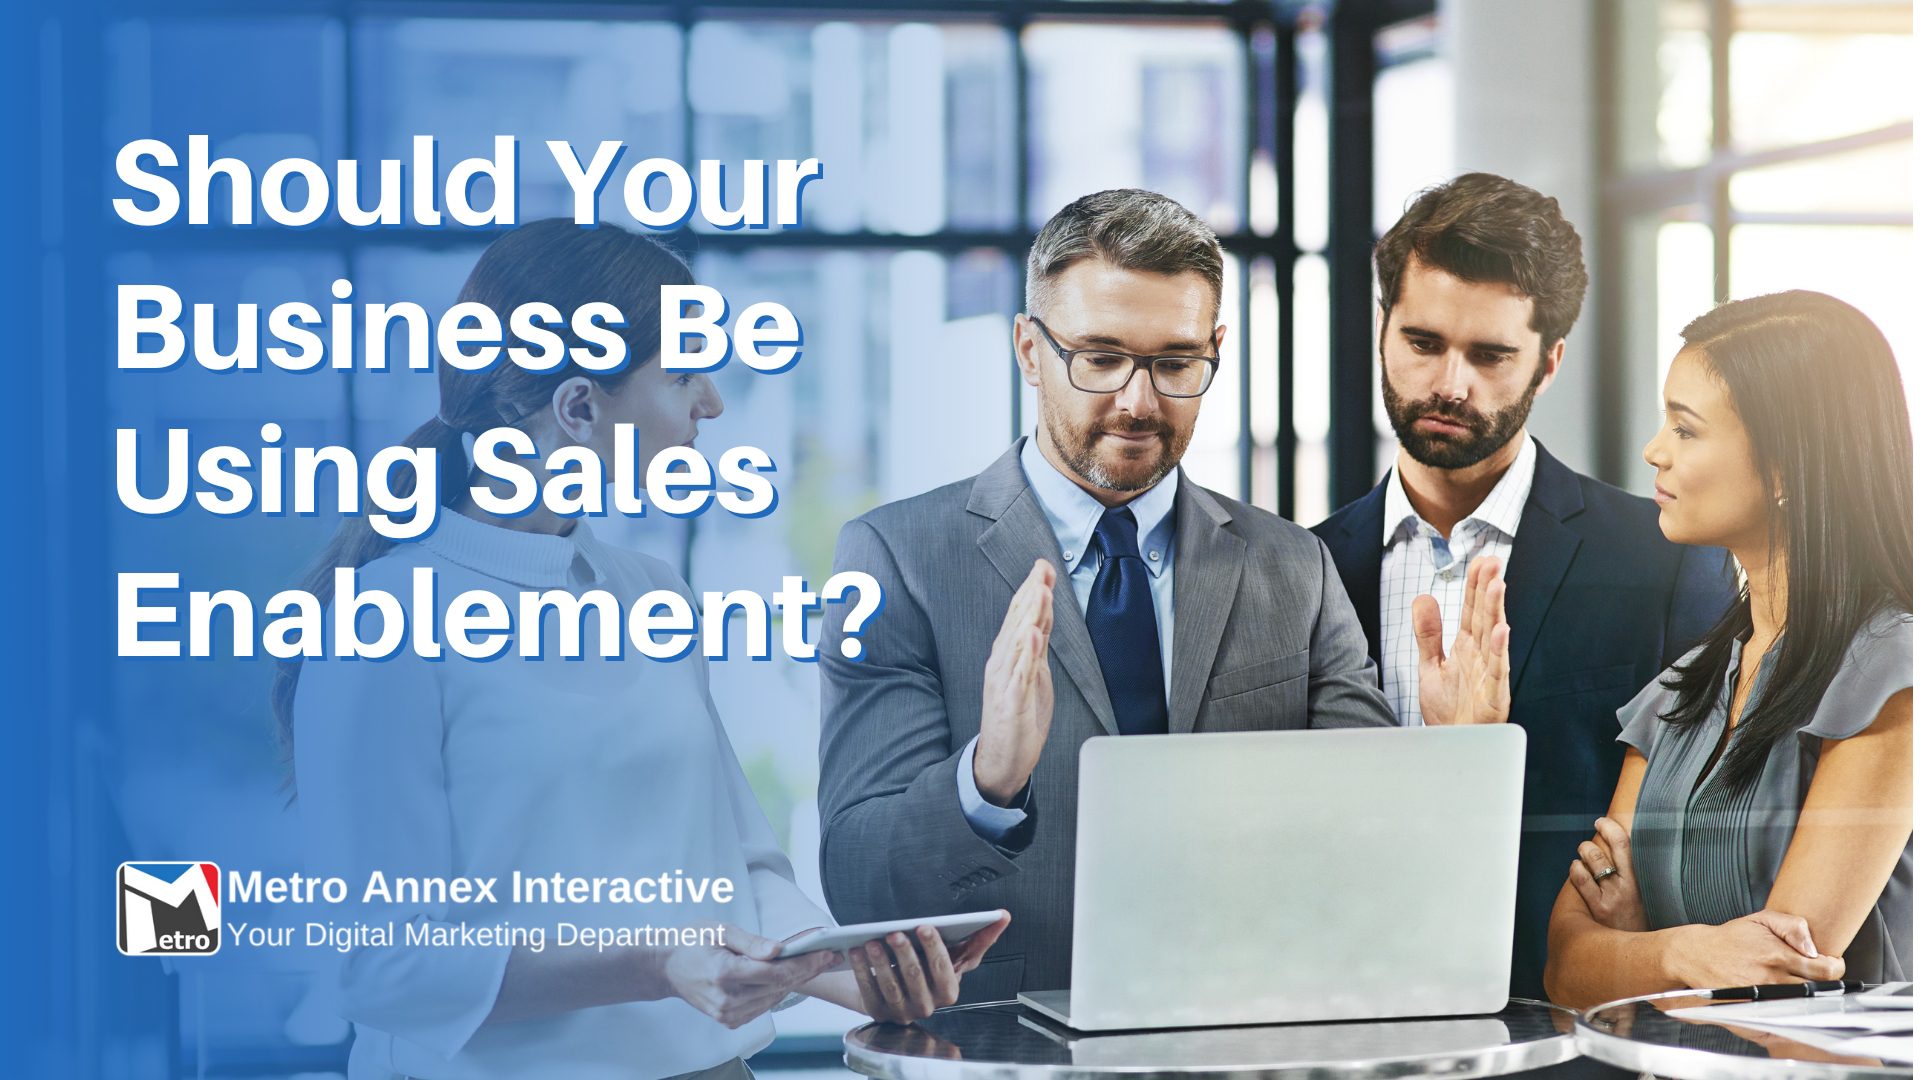 Sales enablement is critical to sales strategy, helping marketing and sales teams stay on top of the ever-evolving sales landscape.